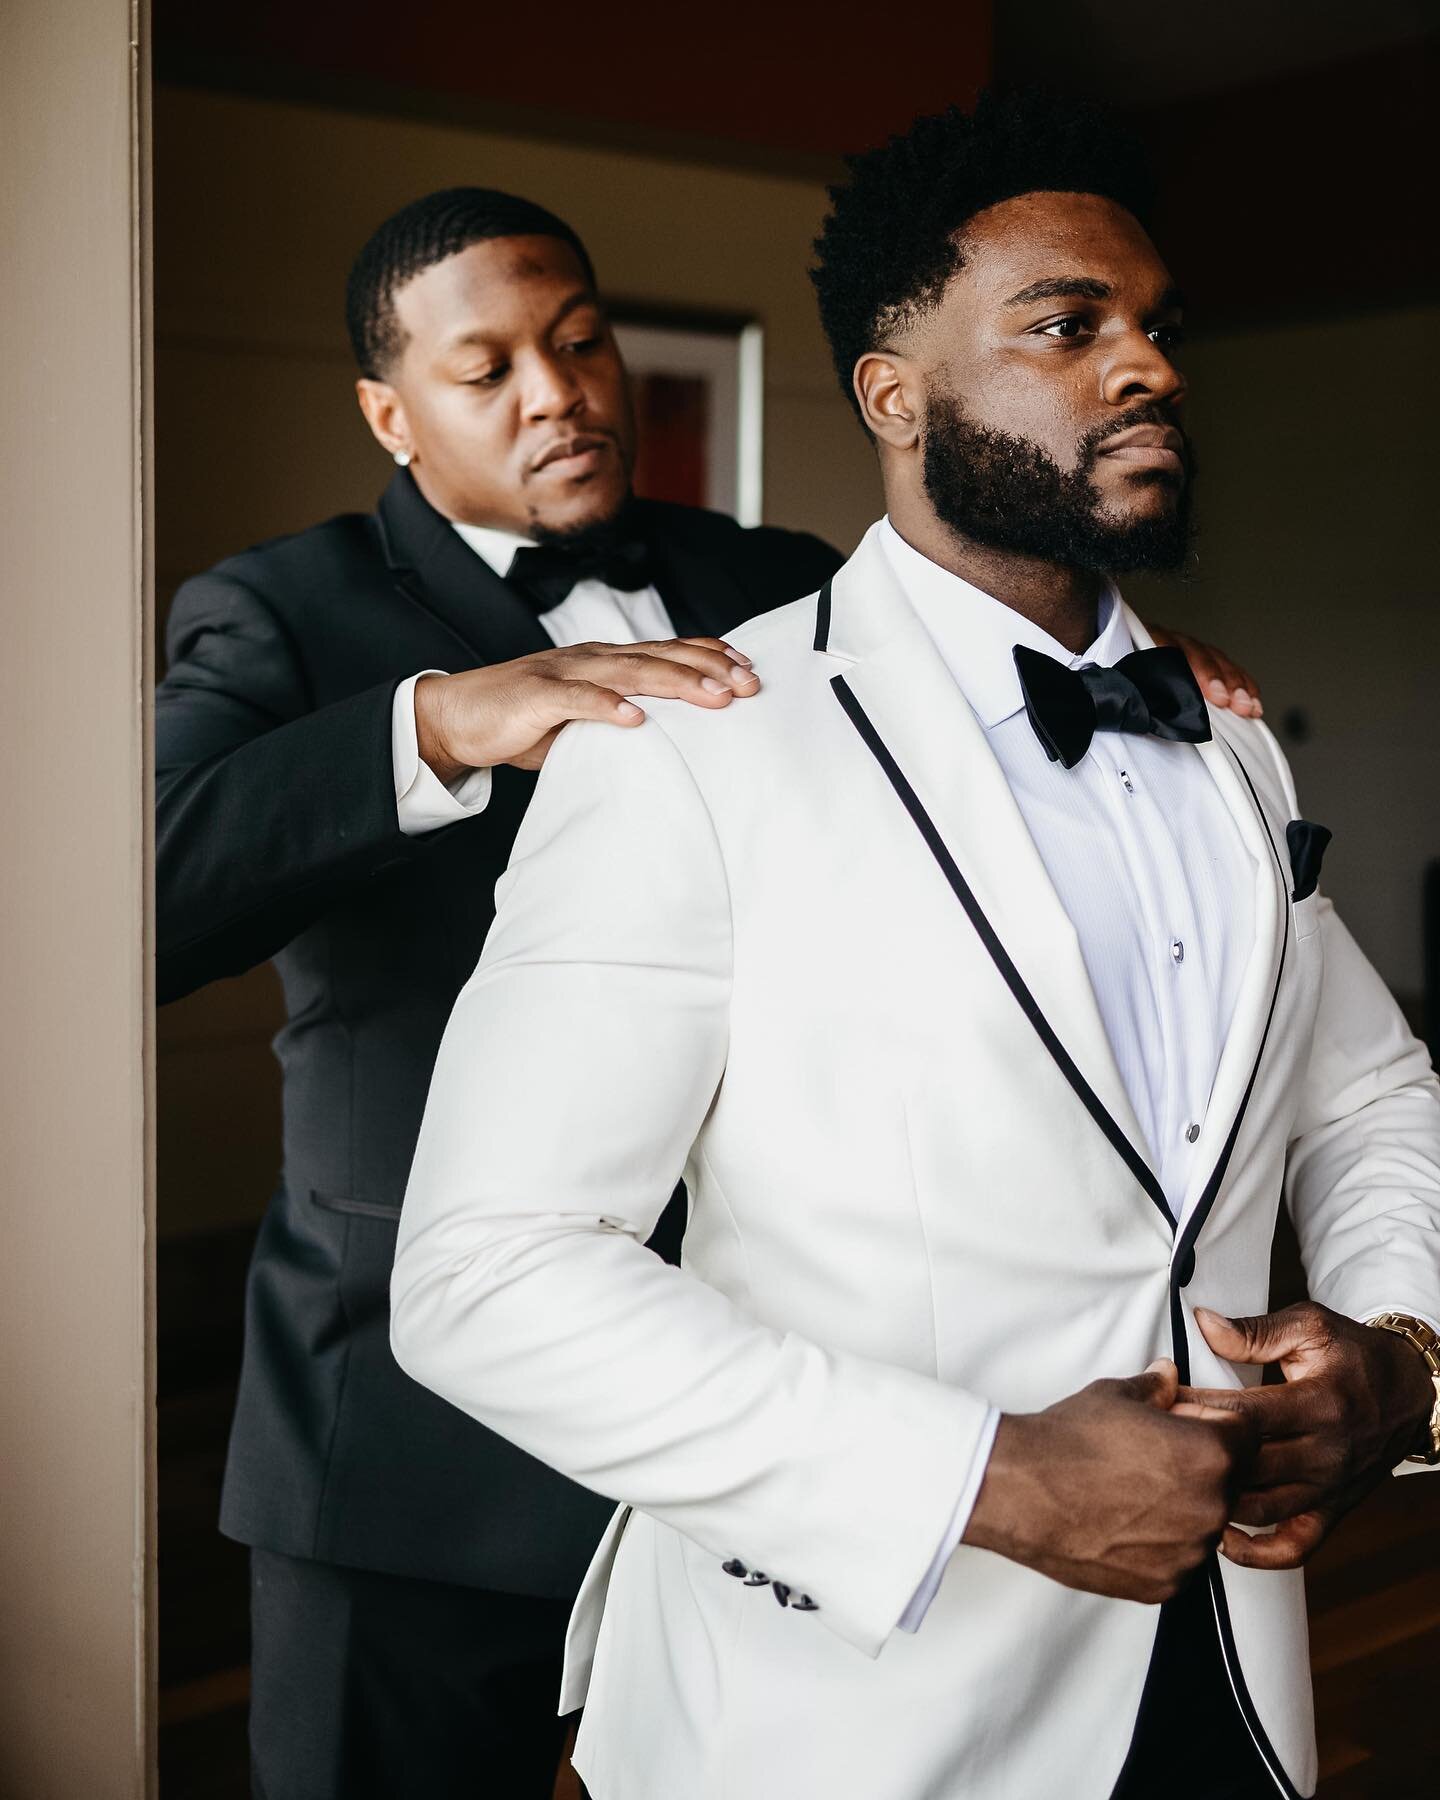 Weddings are also a big day for the groom!
Show a lil love to the men!
-
-
-
-
#groomsmen #groom #wedding #bridesmaids #bride #weddingphotography #mensfashion #weddingday #weddinginspiration #weddingdress #menswear #weddings #fashion #weddingphotogra